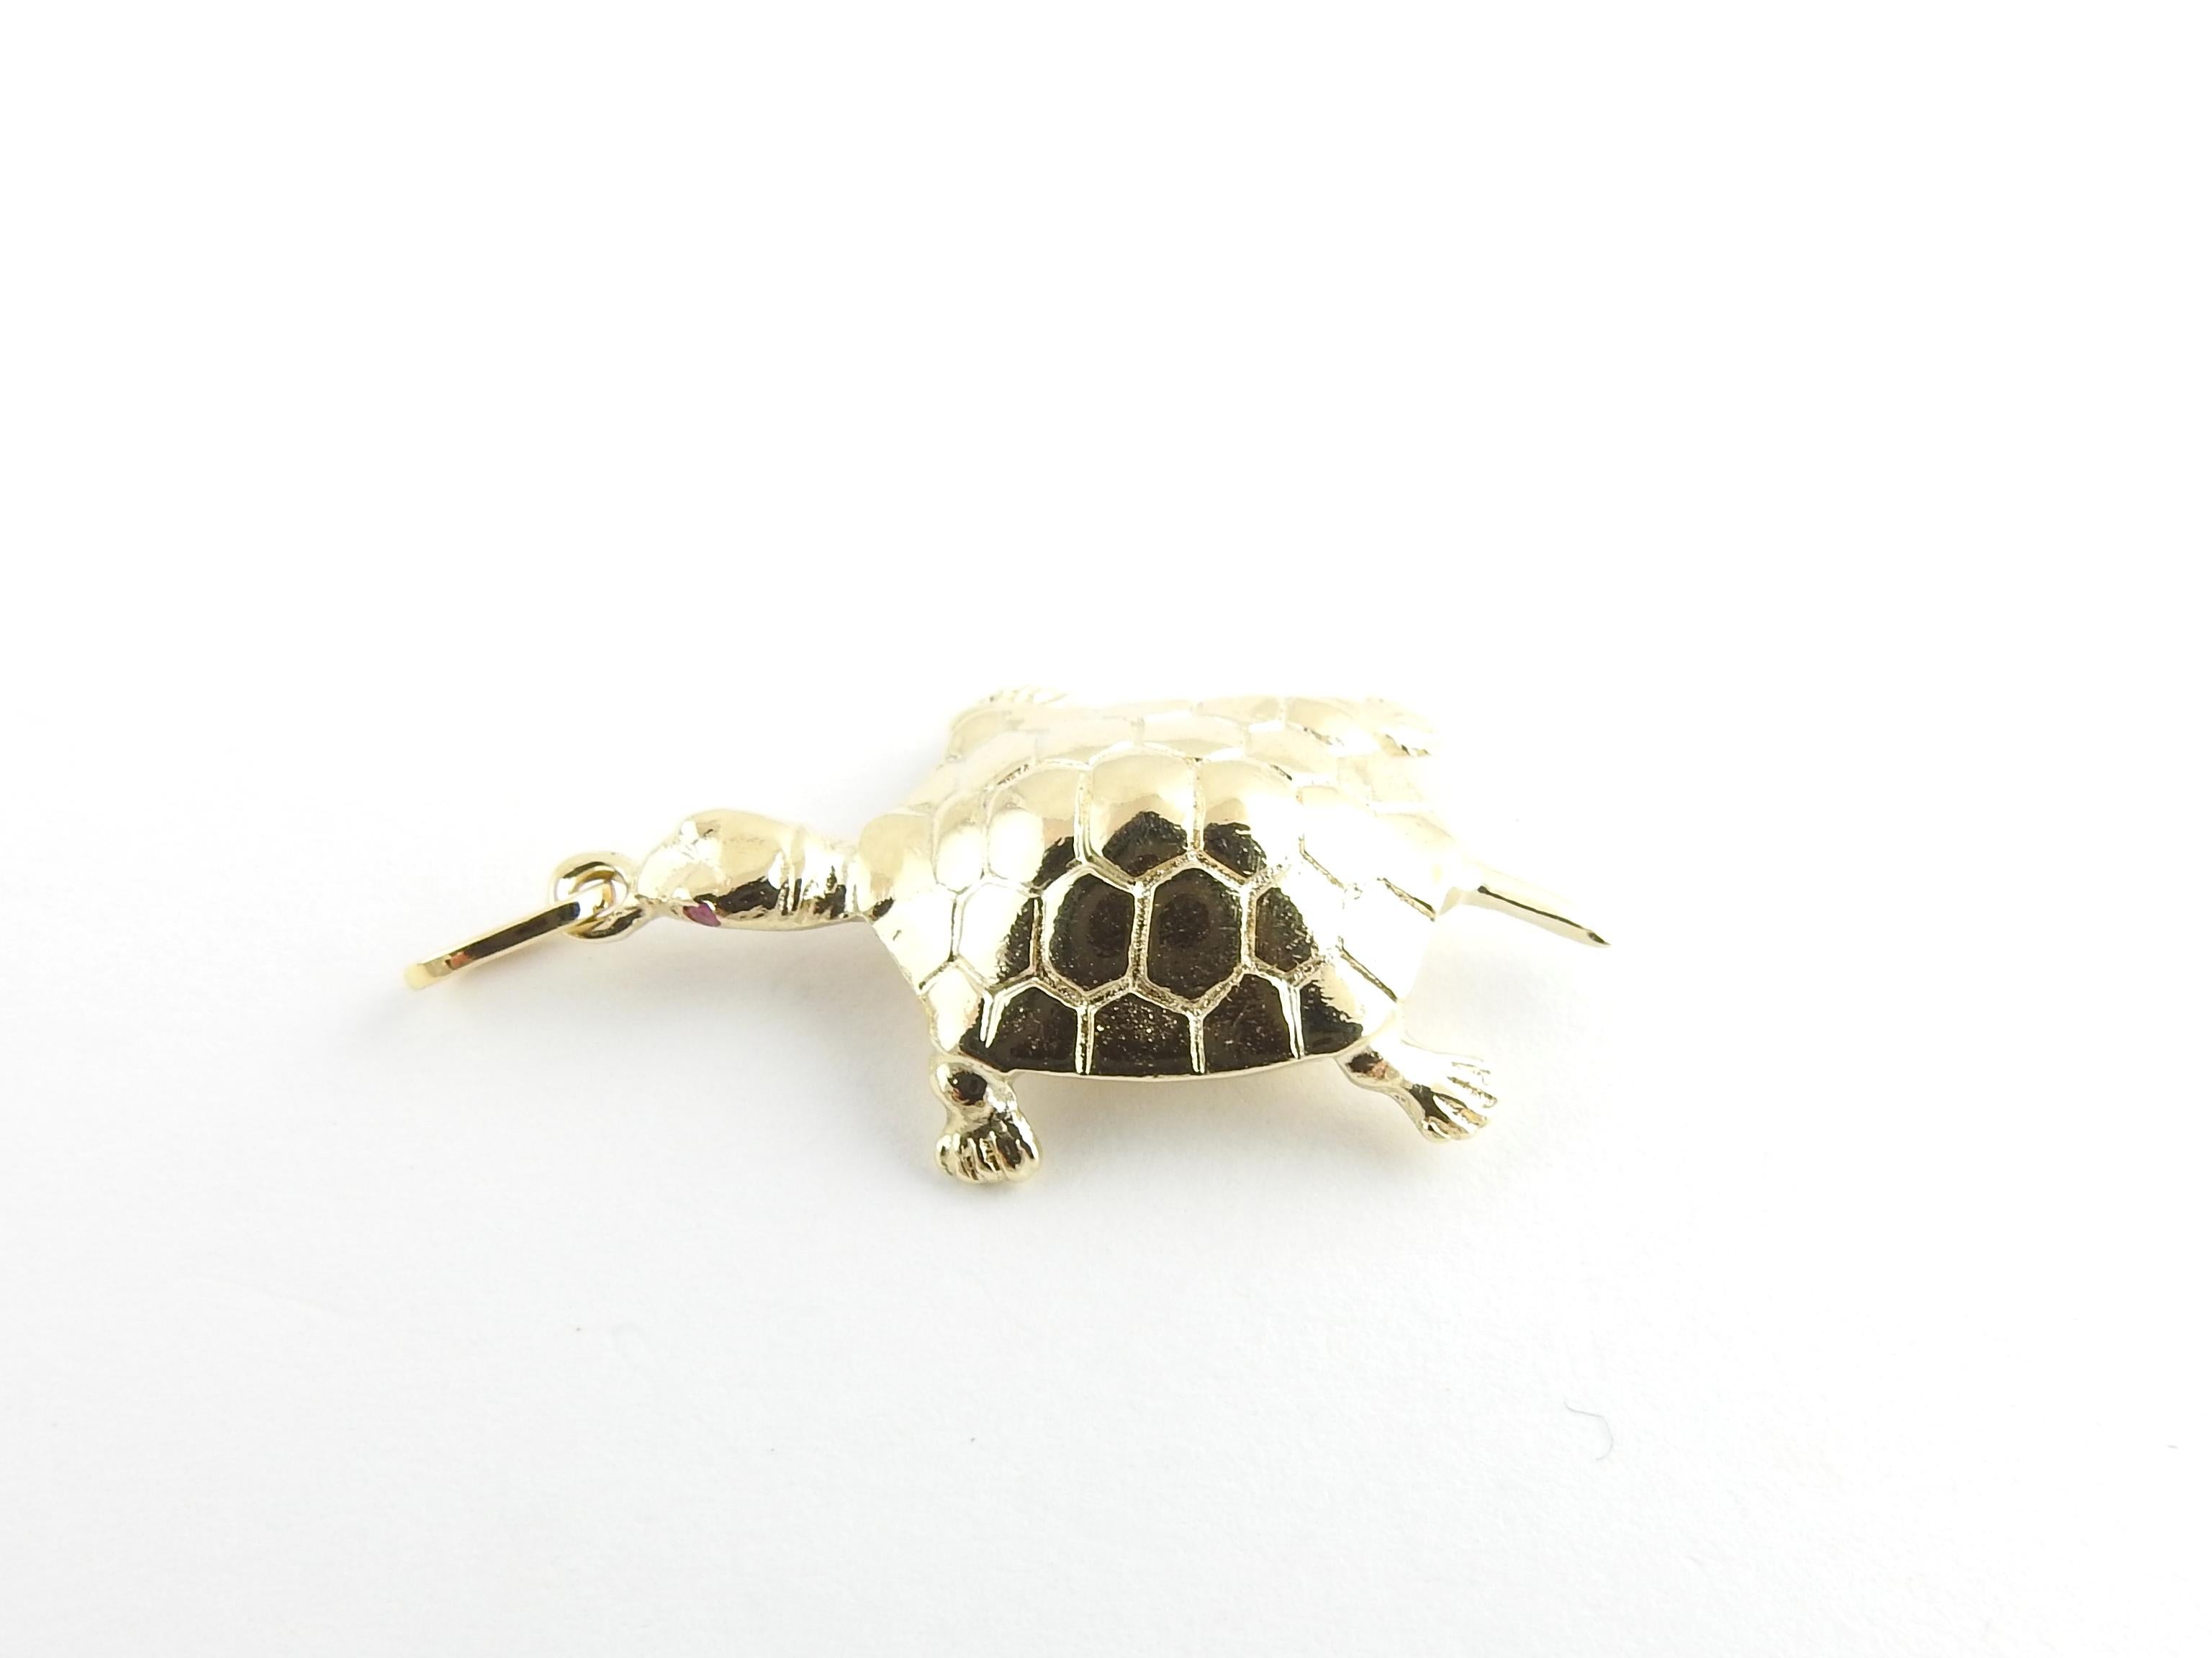 Vintage 14 Karat Yellow Gold Sea Turtle Charm

Sea turtles symbolize patience, wisdom and good luck!

Size: 32 mm x 10 mm (actual charm)

Weight: 3.0 dwt. / 4.7 gr.

Stamped: 14K

Very good condition, professionally polished.

Will come packaged in